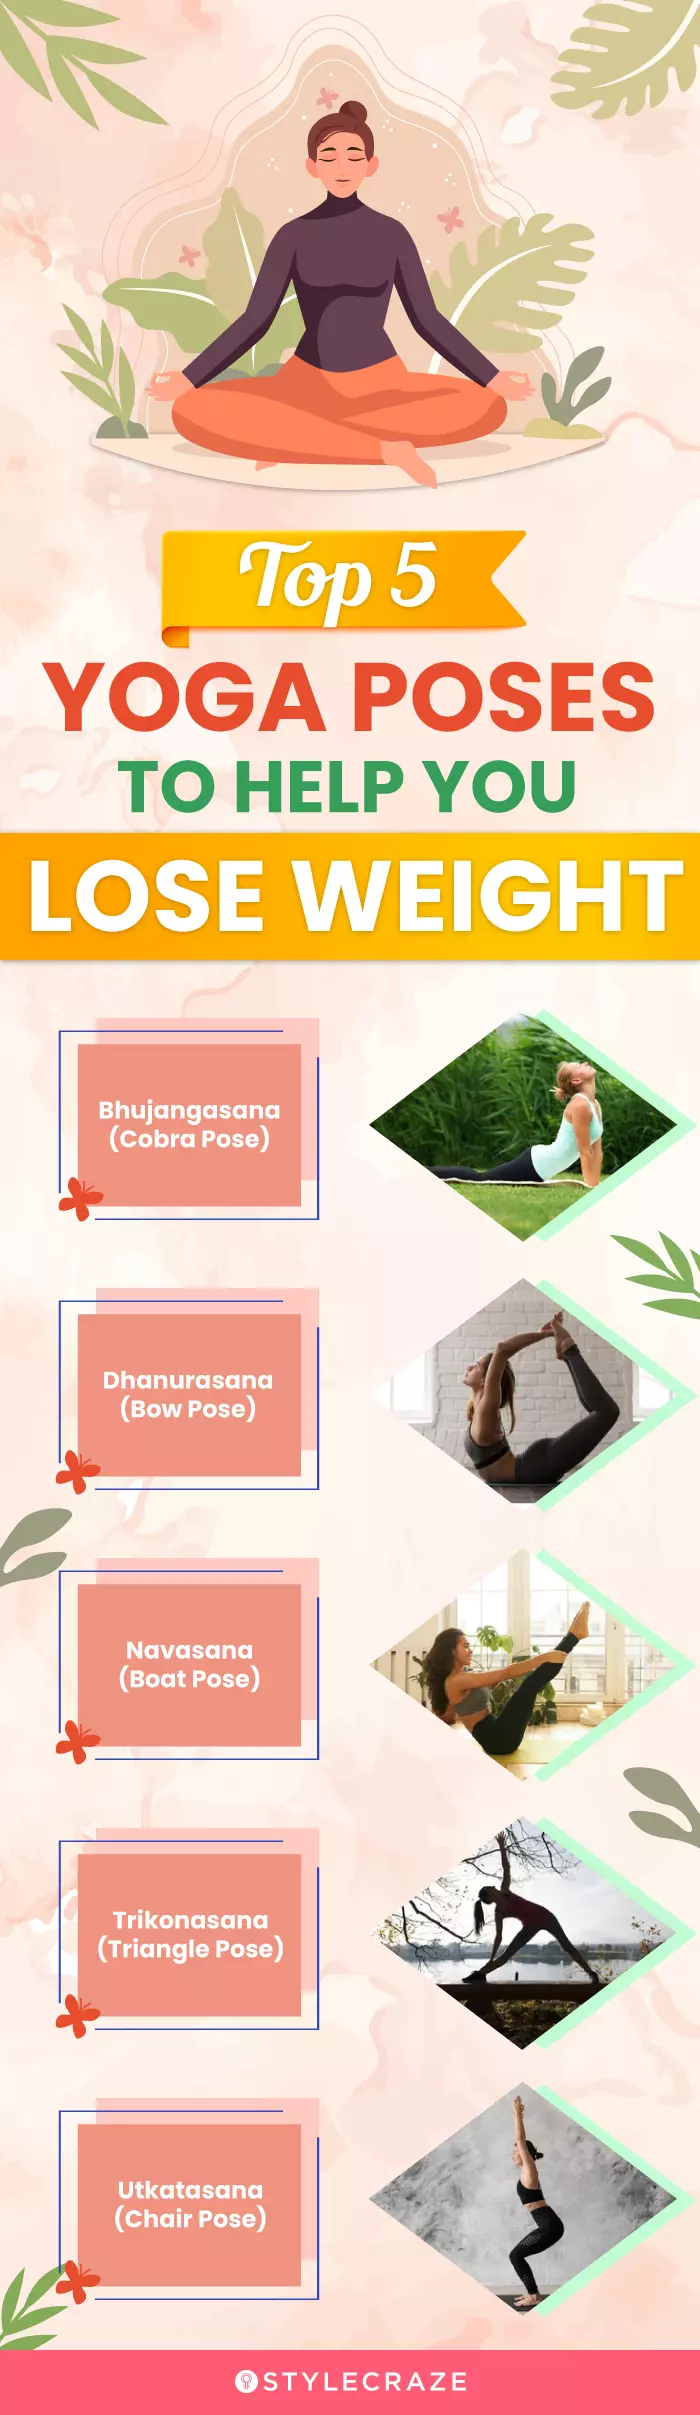 top 5 yoga poses to help you lose weight (infographic)